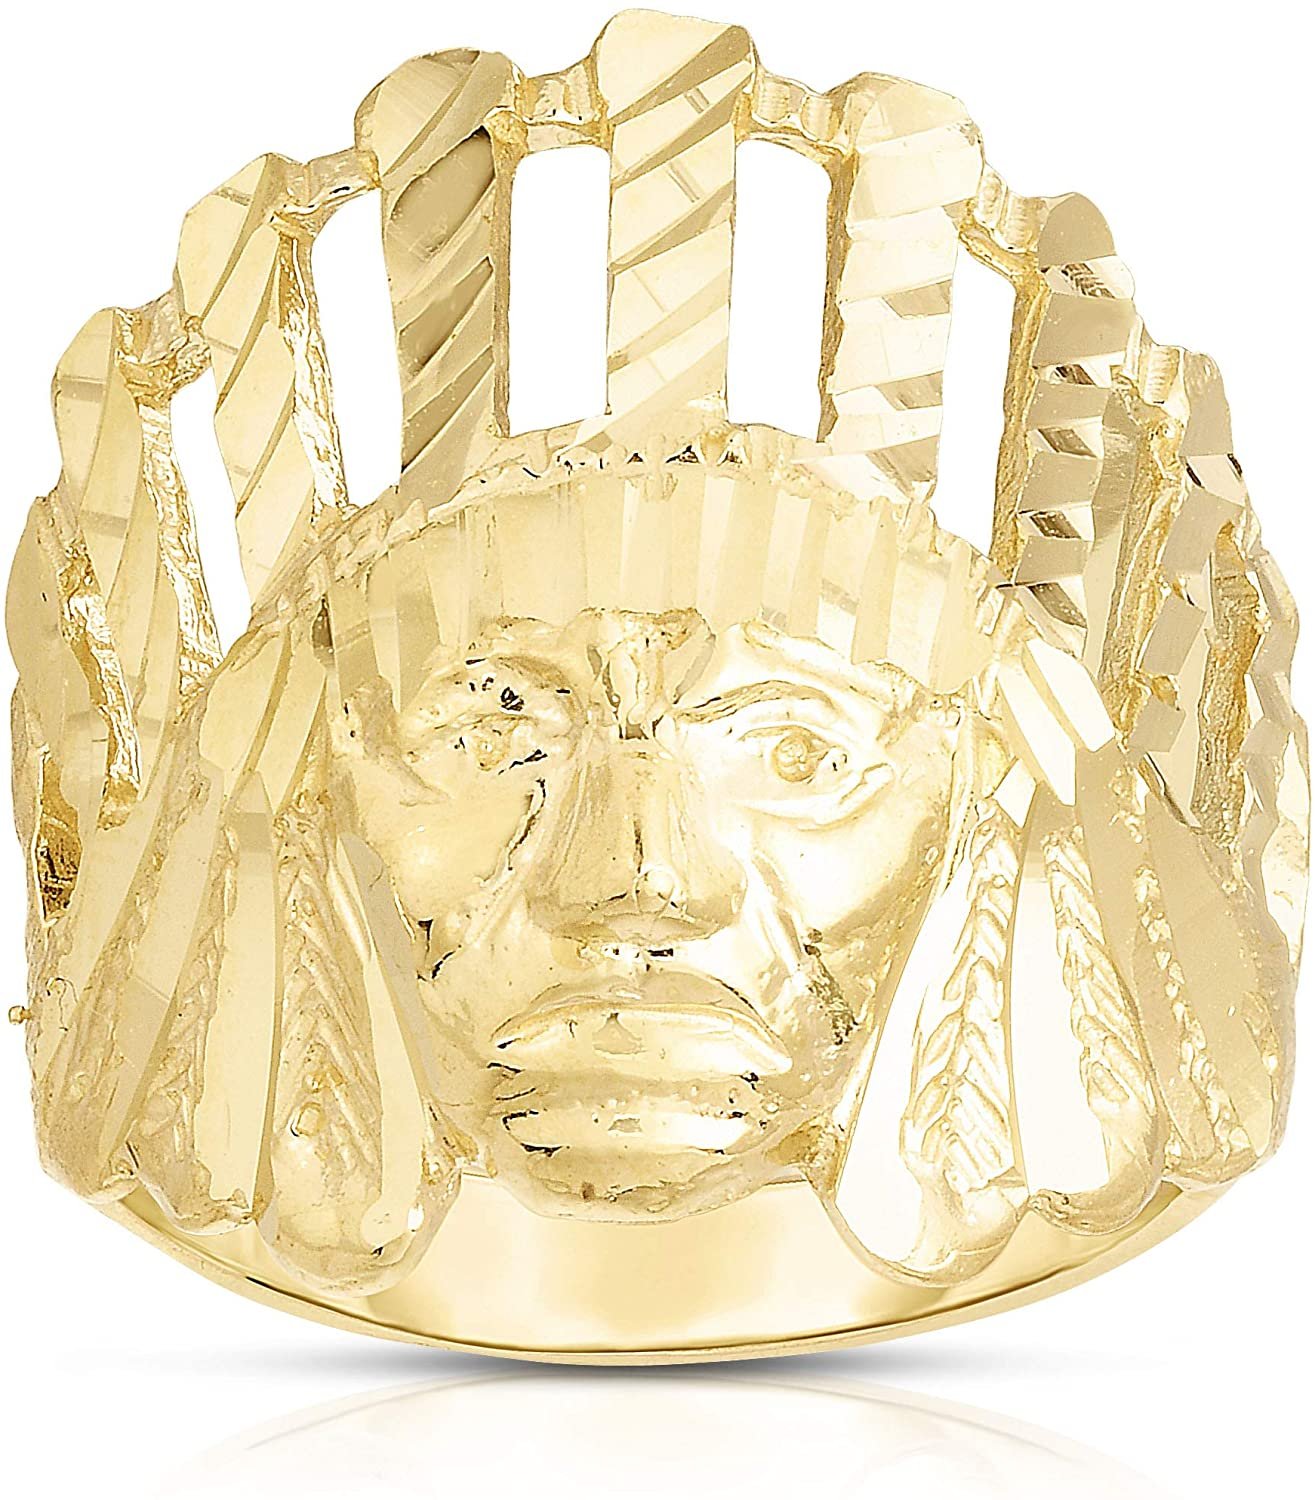 Floreo 10k Yellow Gold 20.7 Native American Indian Tribal Chief Head Ring